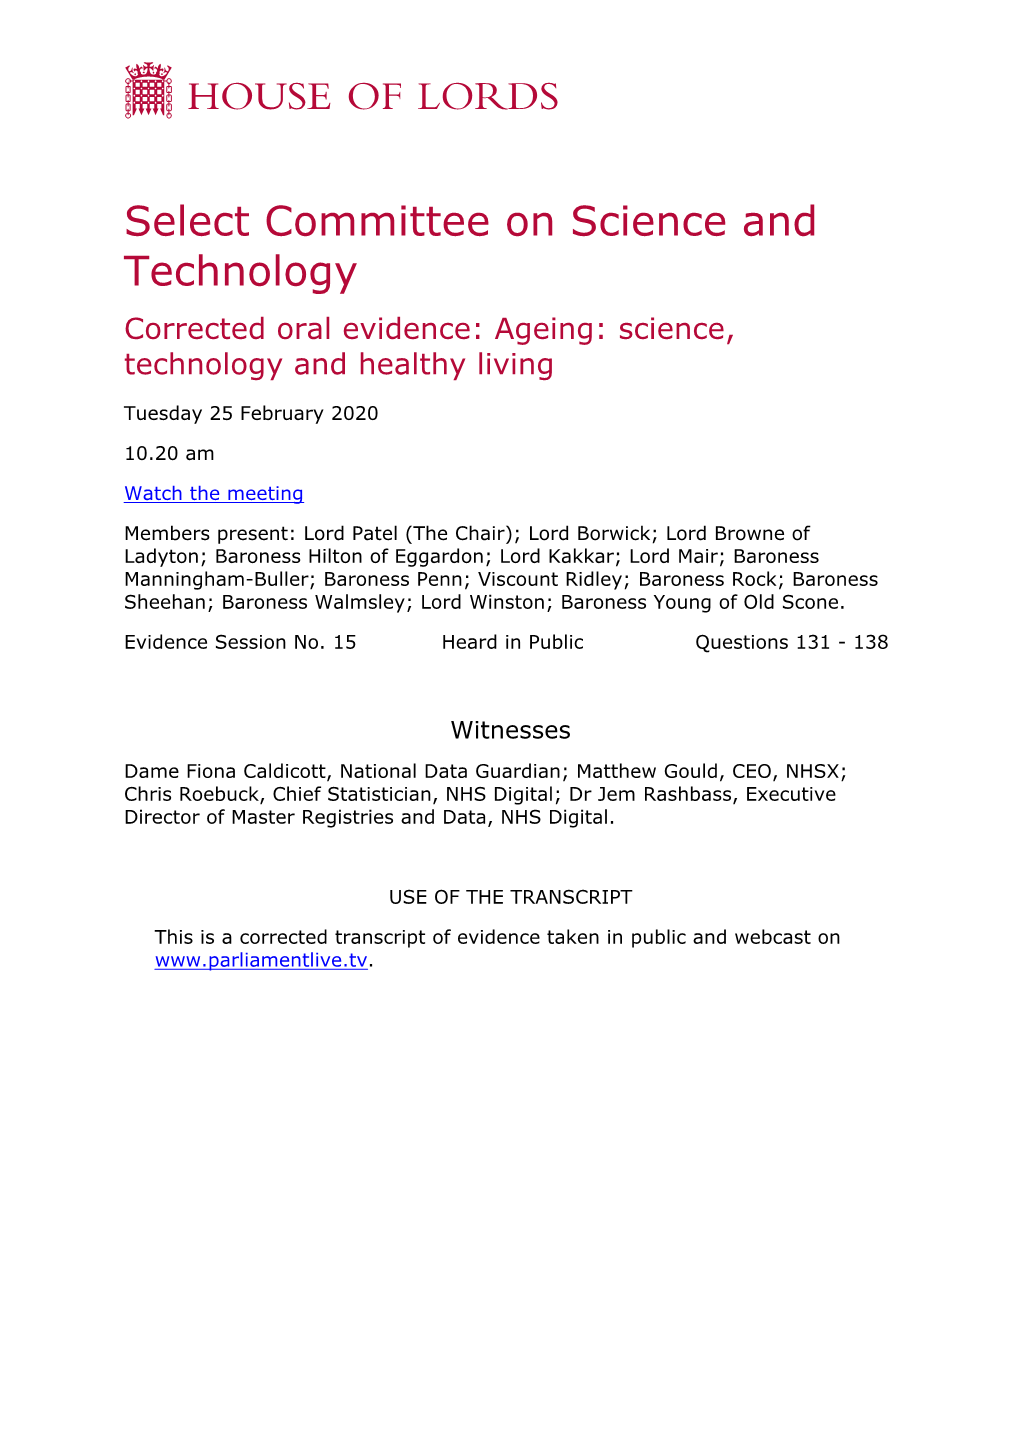 Select Committee on Science and Technology Corrected Oral Evidence: Ageing: Science, Technology and Healthy Living